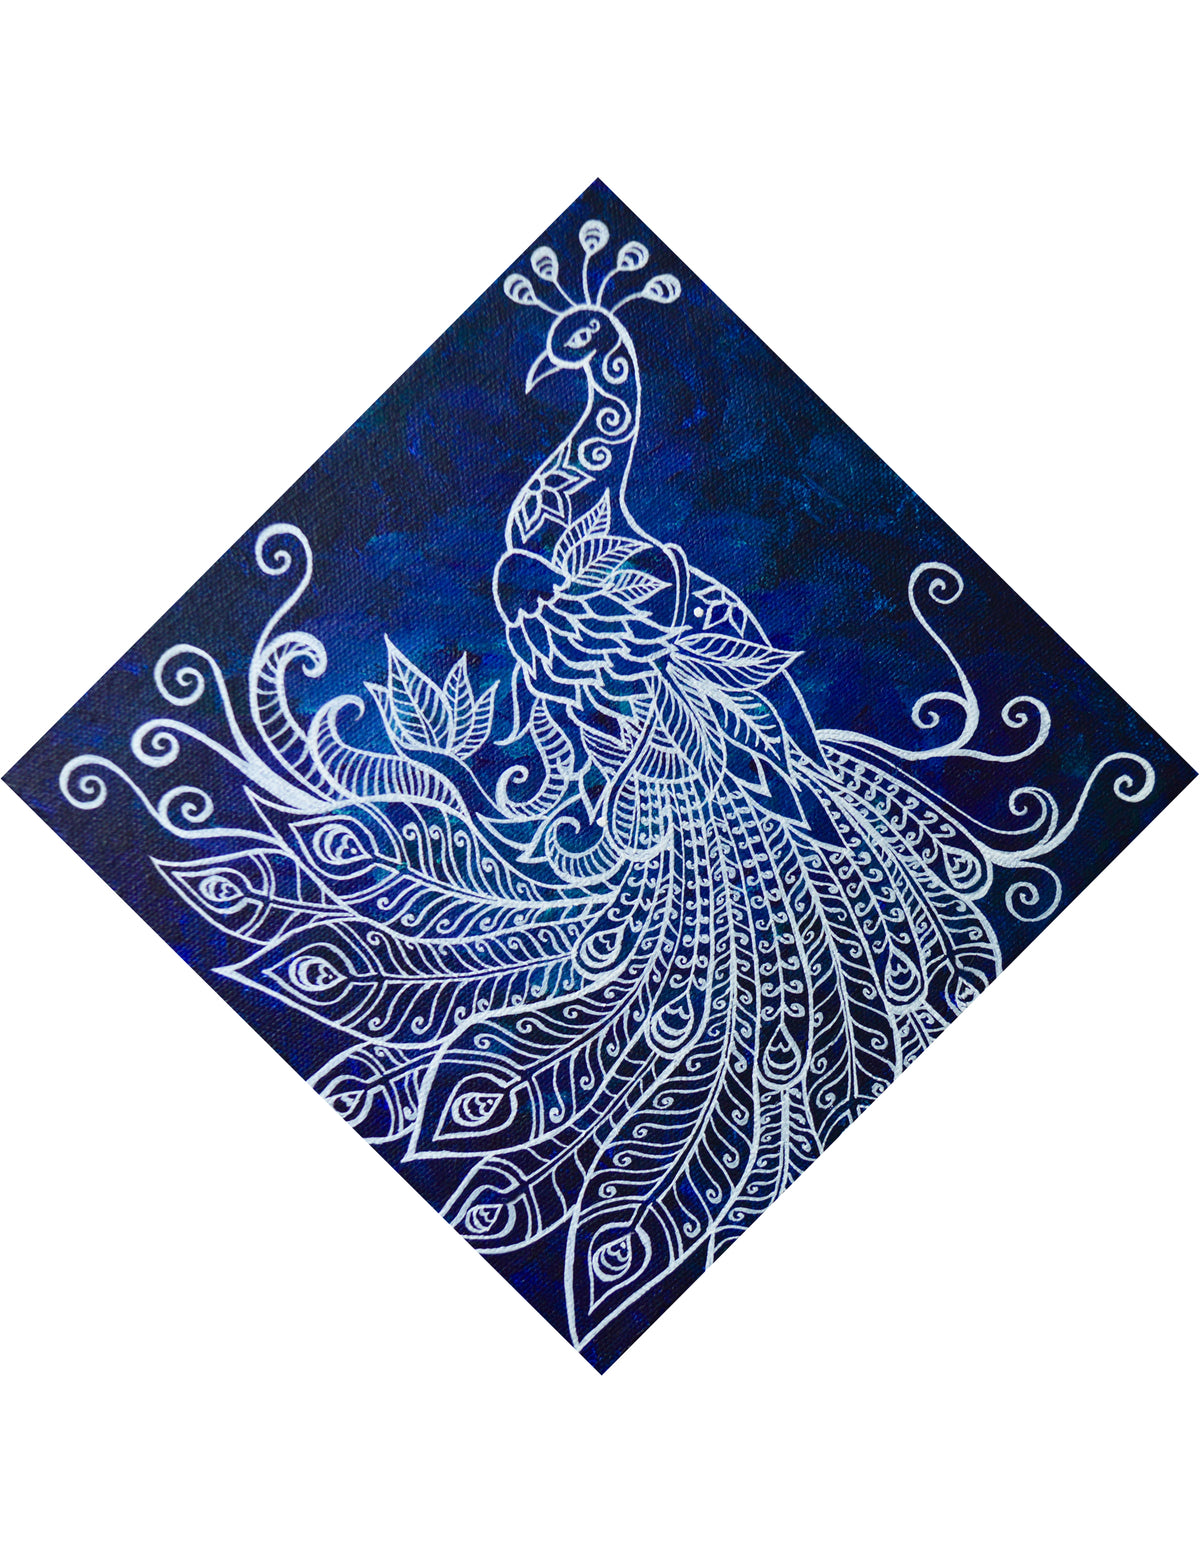 "Midnight Peacock" by Bronwen Valentine - Reproduction